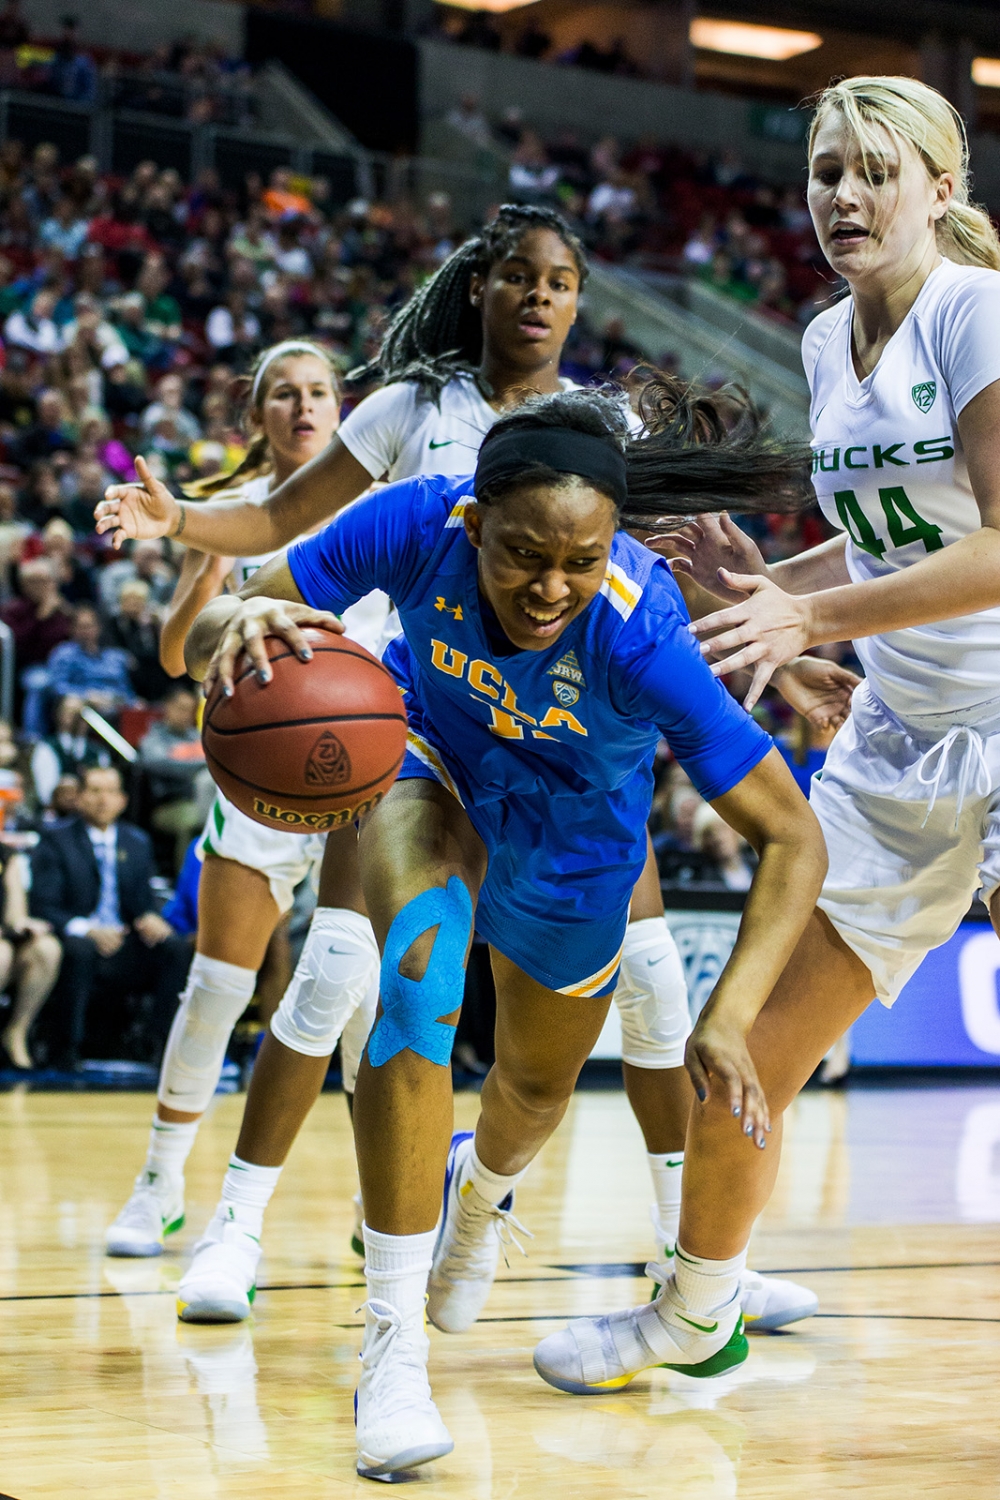 Gallery: Women’s basketball plays Cal, Oregon in Pac-12 - Daily Bruin